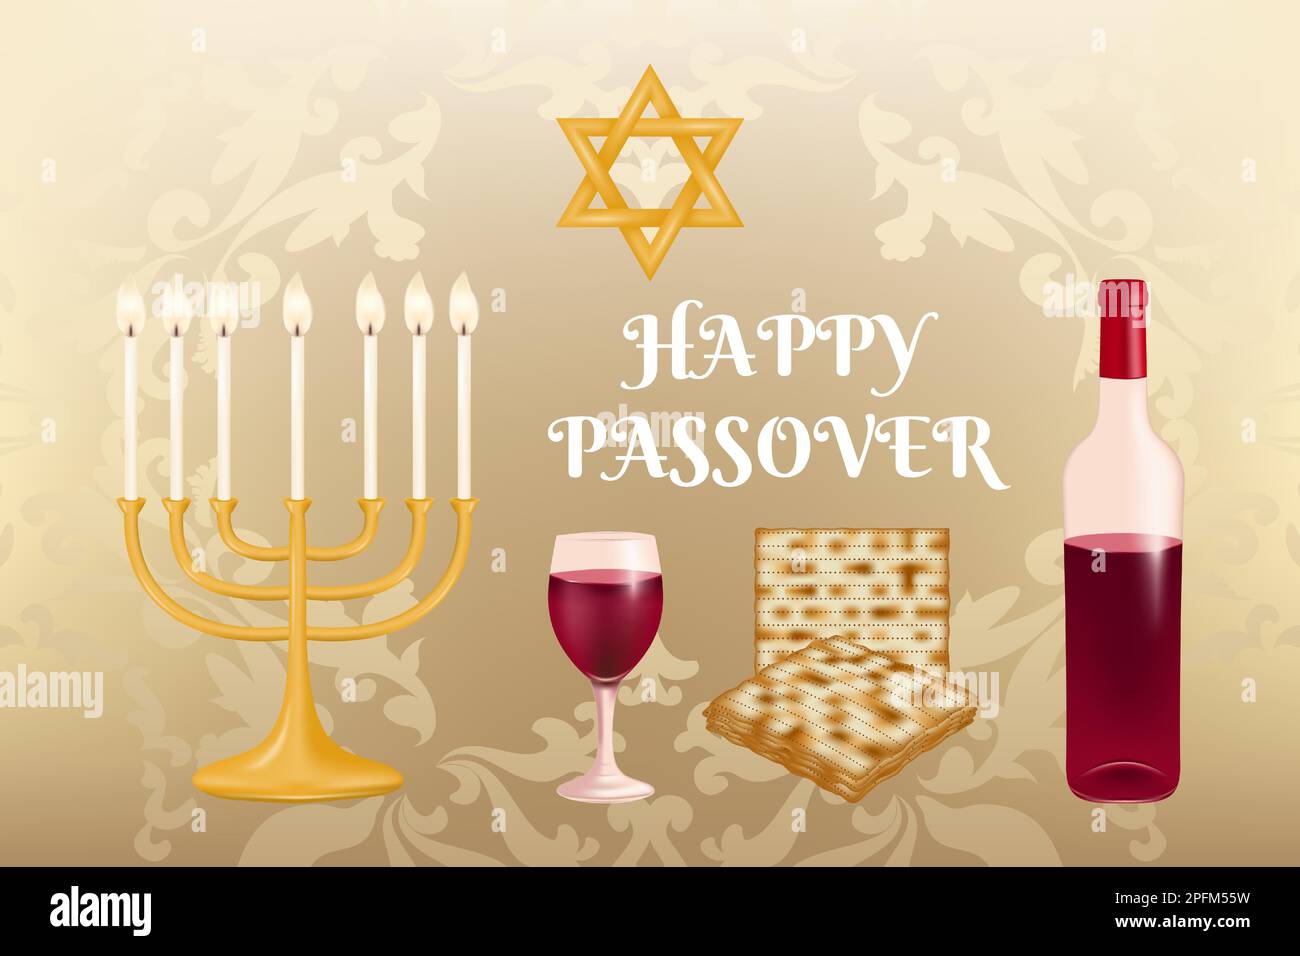 Celebrate the joyous occasion of Passover with this festive background featuring candles, matzah, and red wine amidst a beautiful patterned design Stock Vector